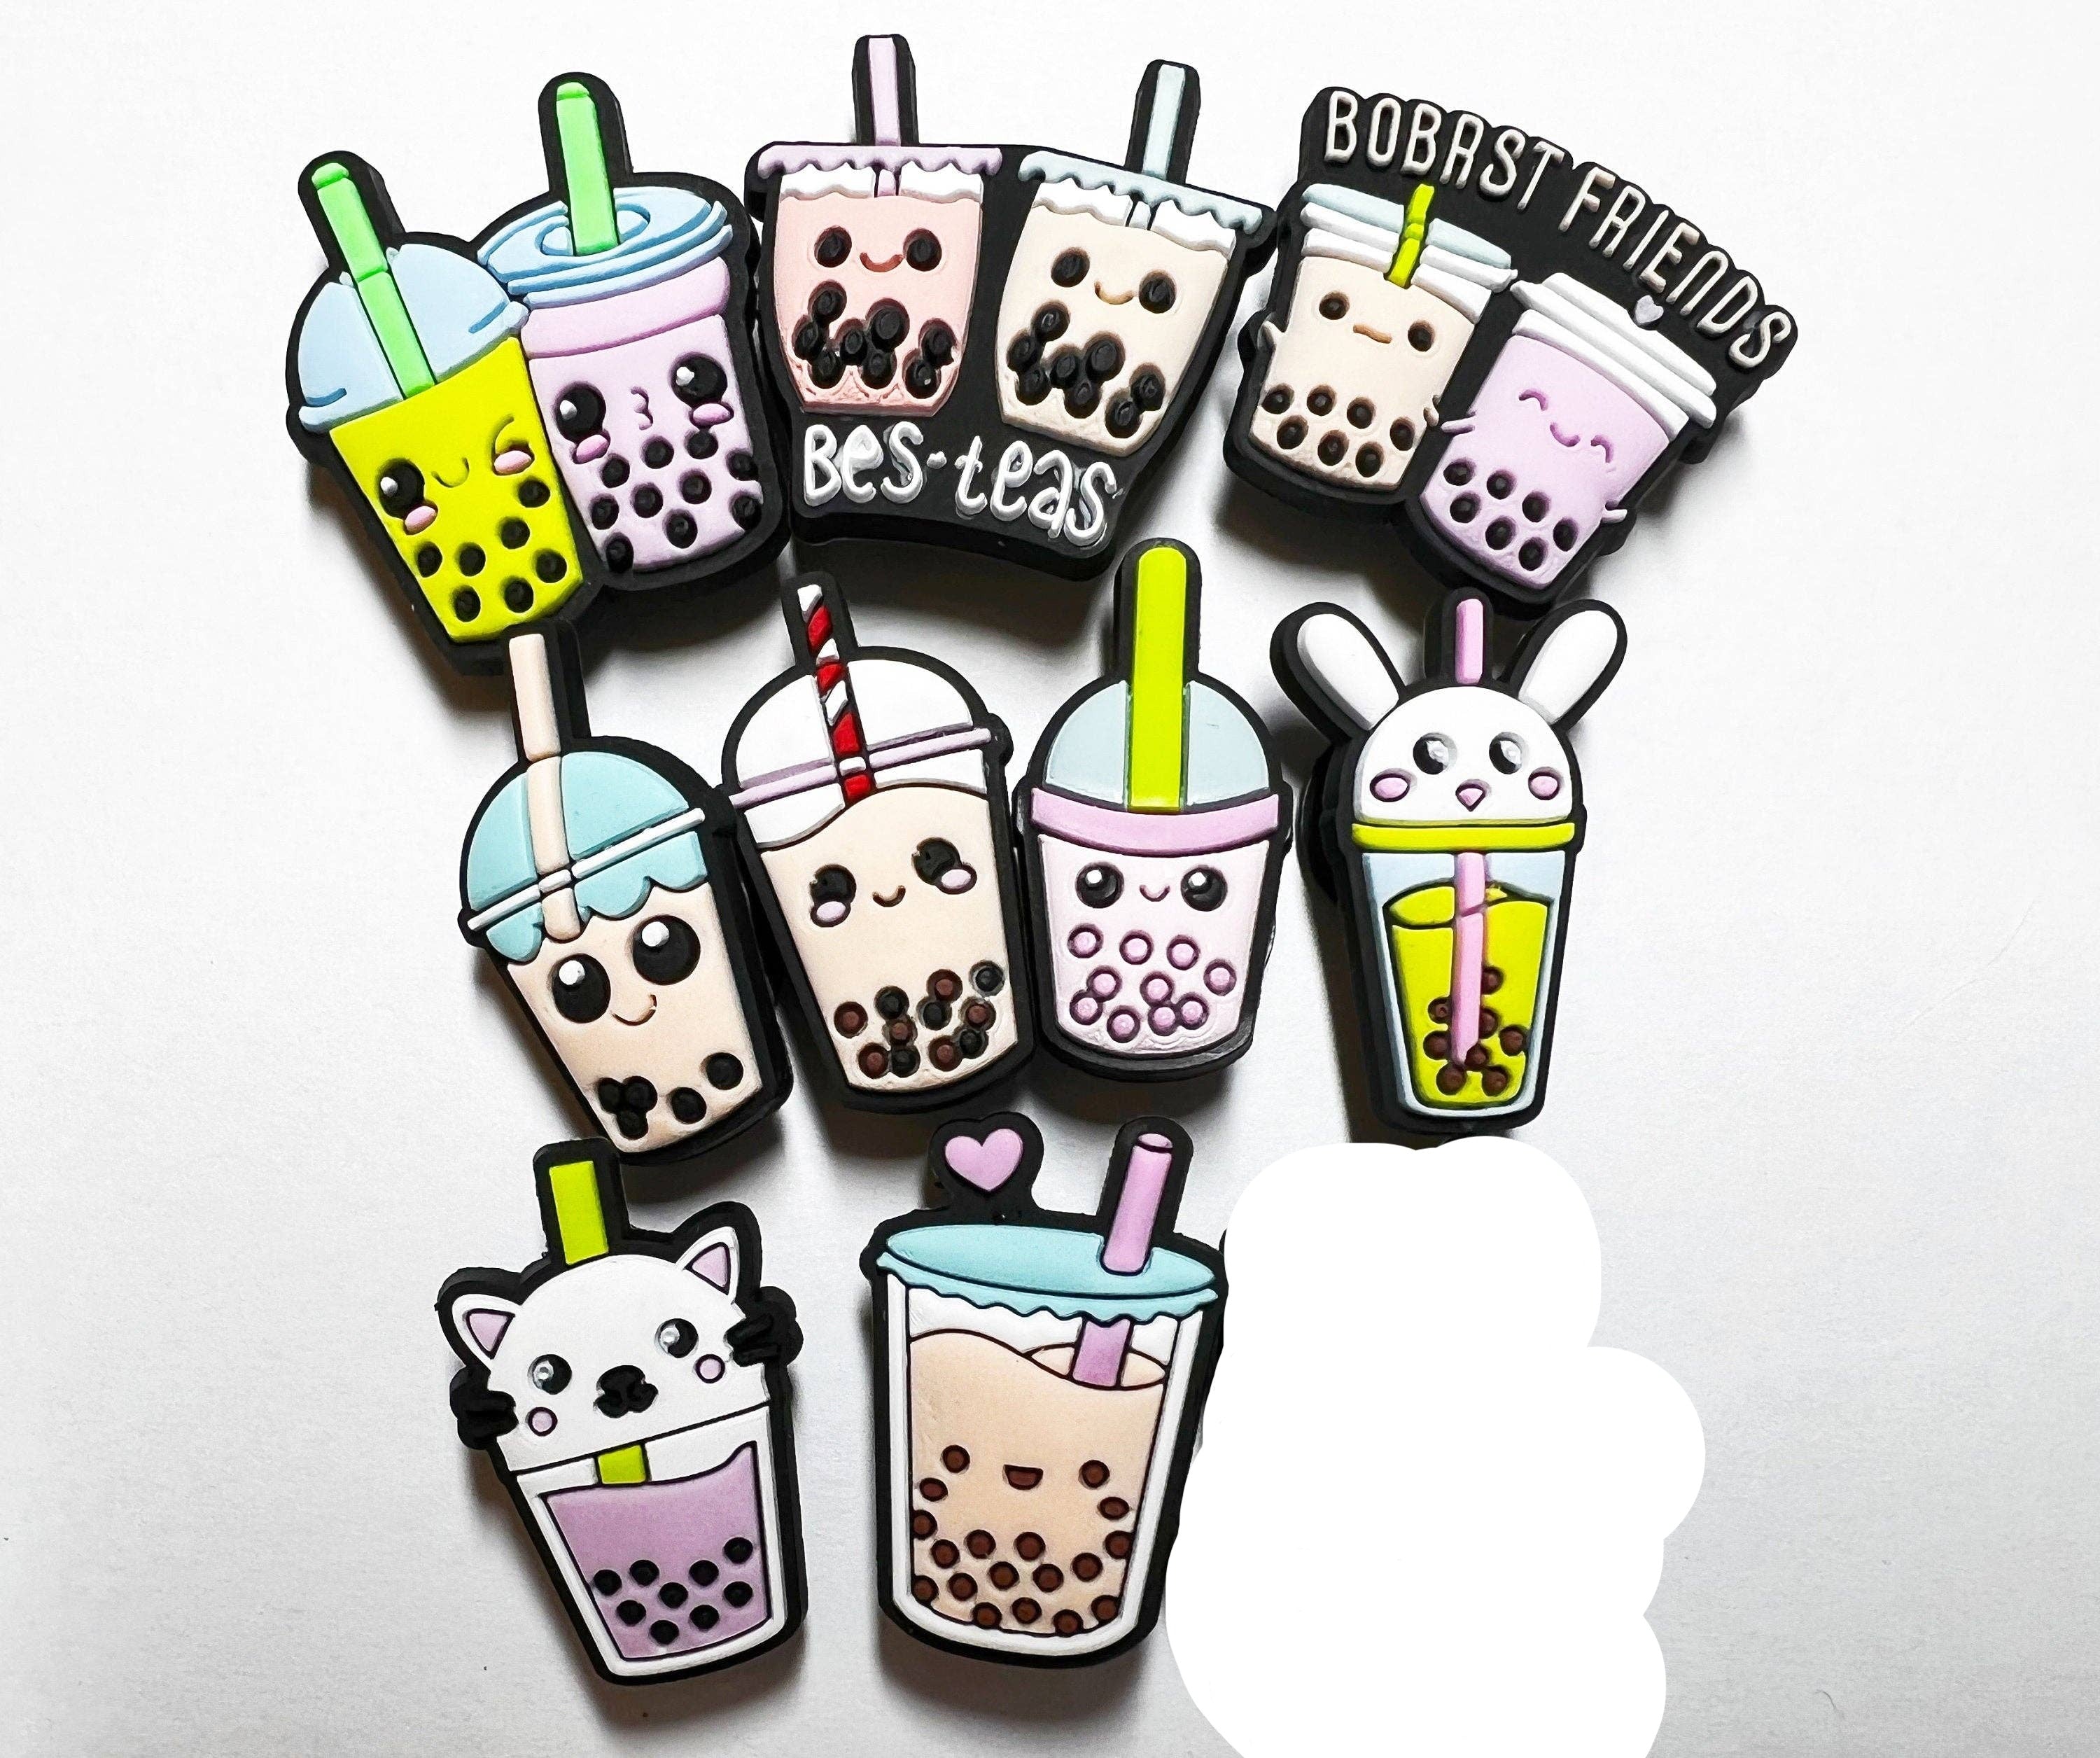 Pick your own bubble tea/boba tea and more shoe charms